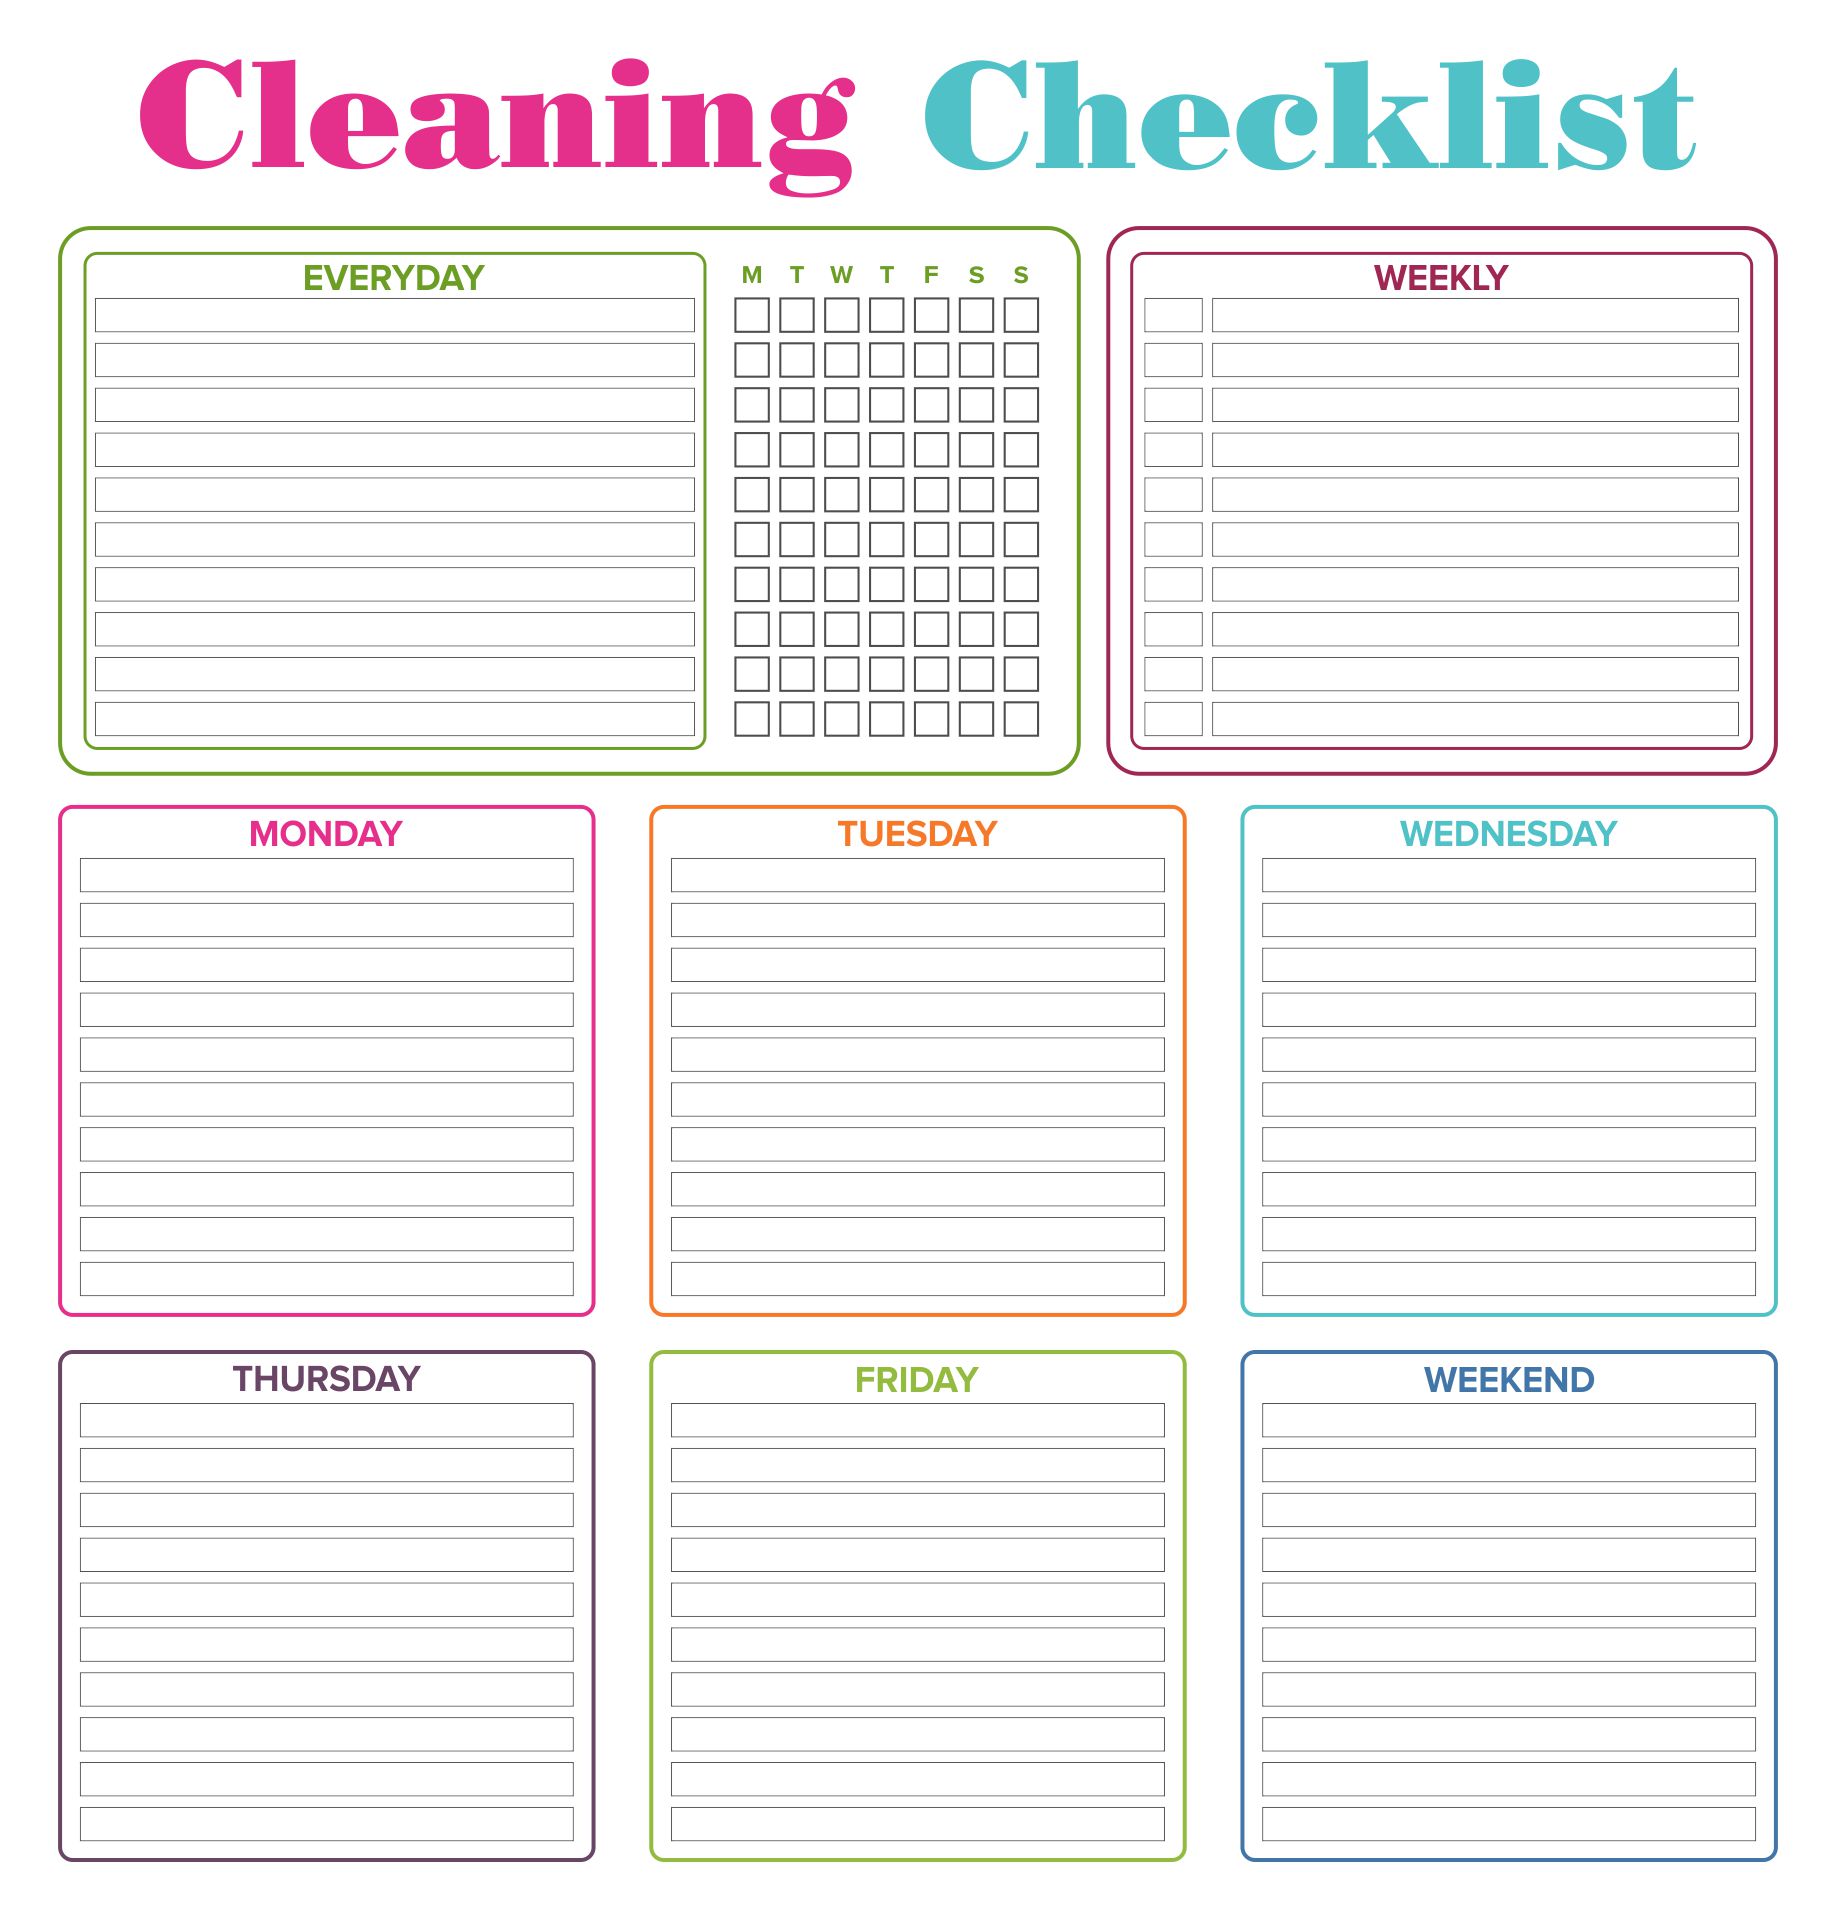 Best Images Of Daily Cleaning Checklist Printable Daily House